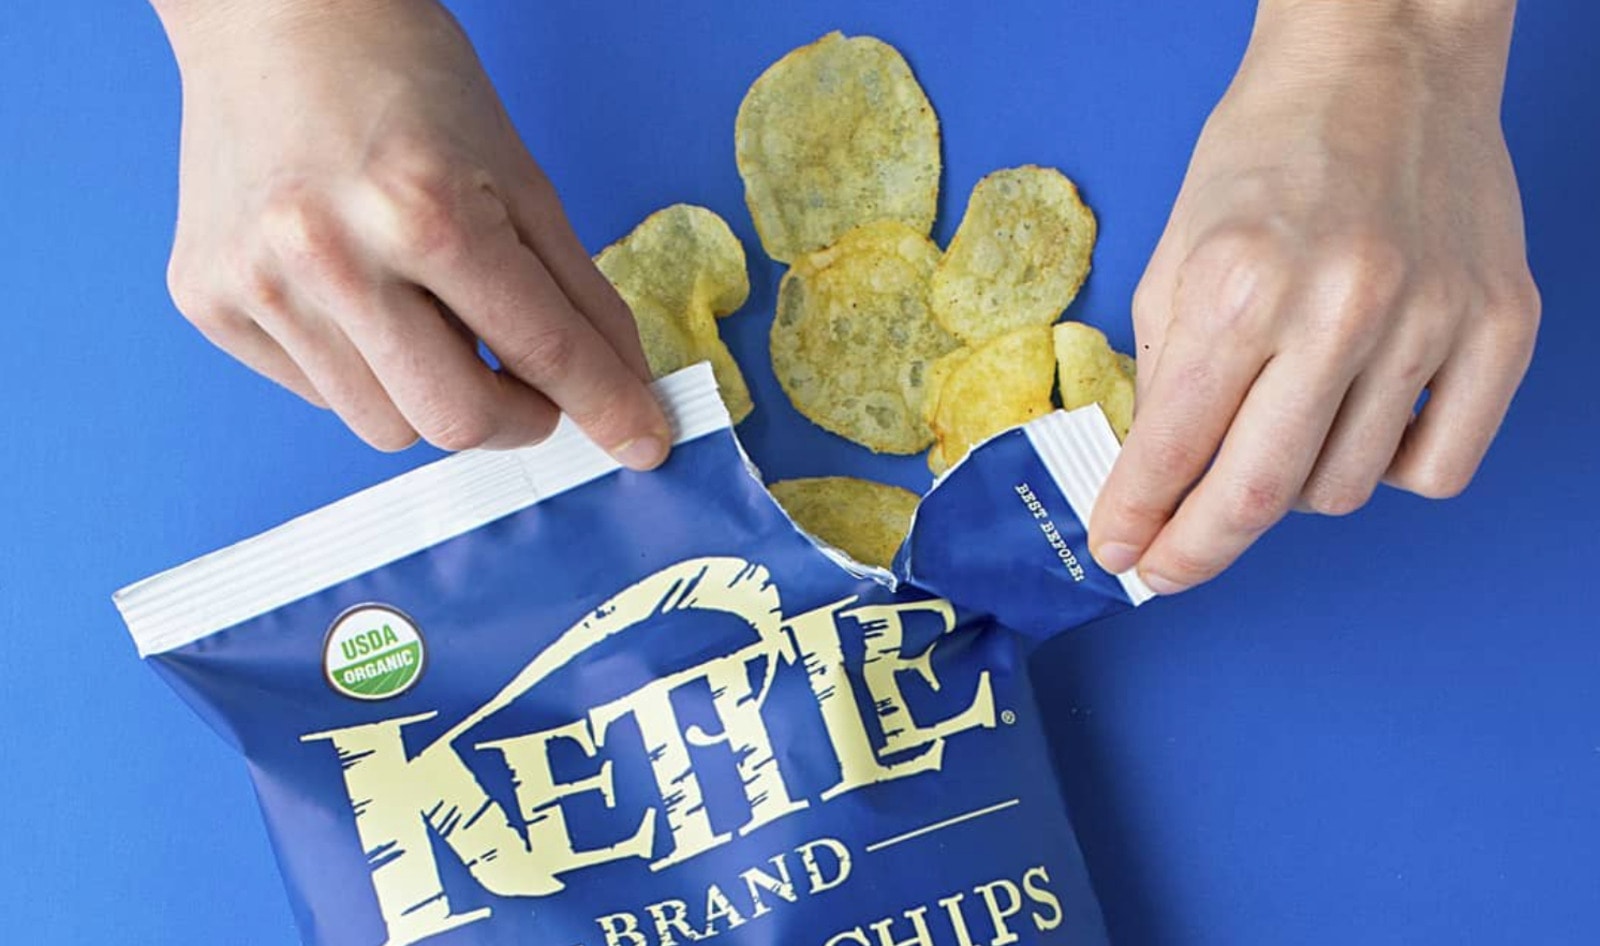 These 7 Kettle Chip Flavors Are Deliciously Dairy-Free